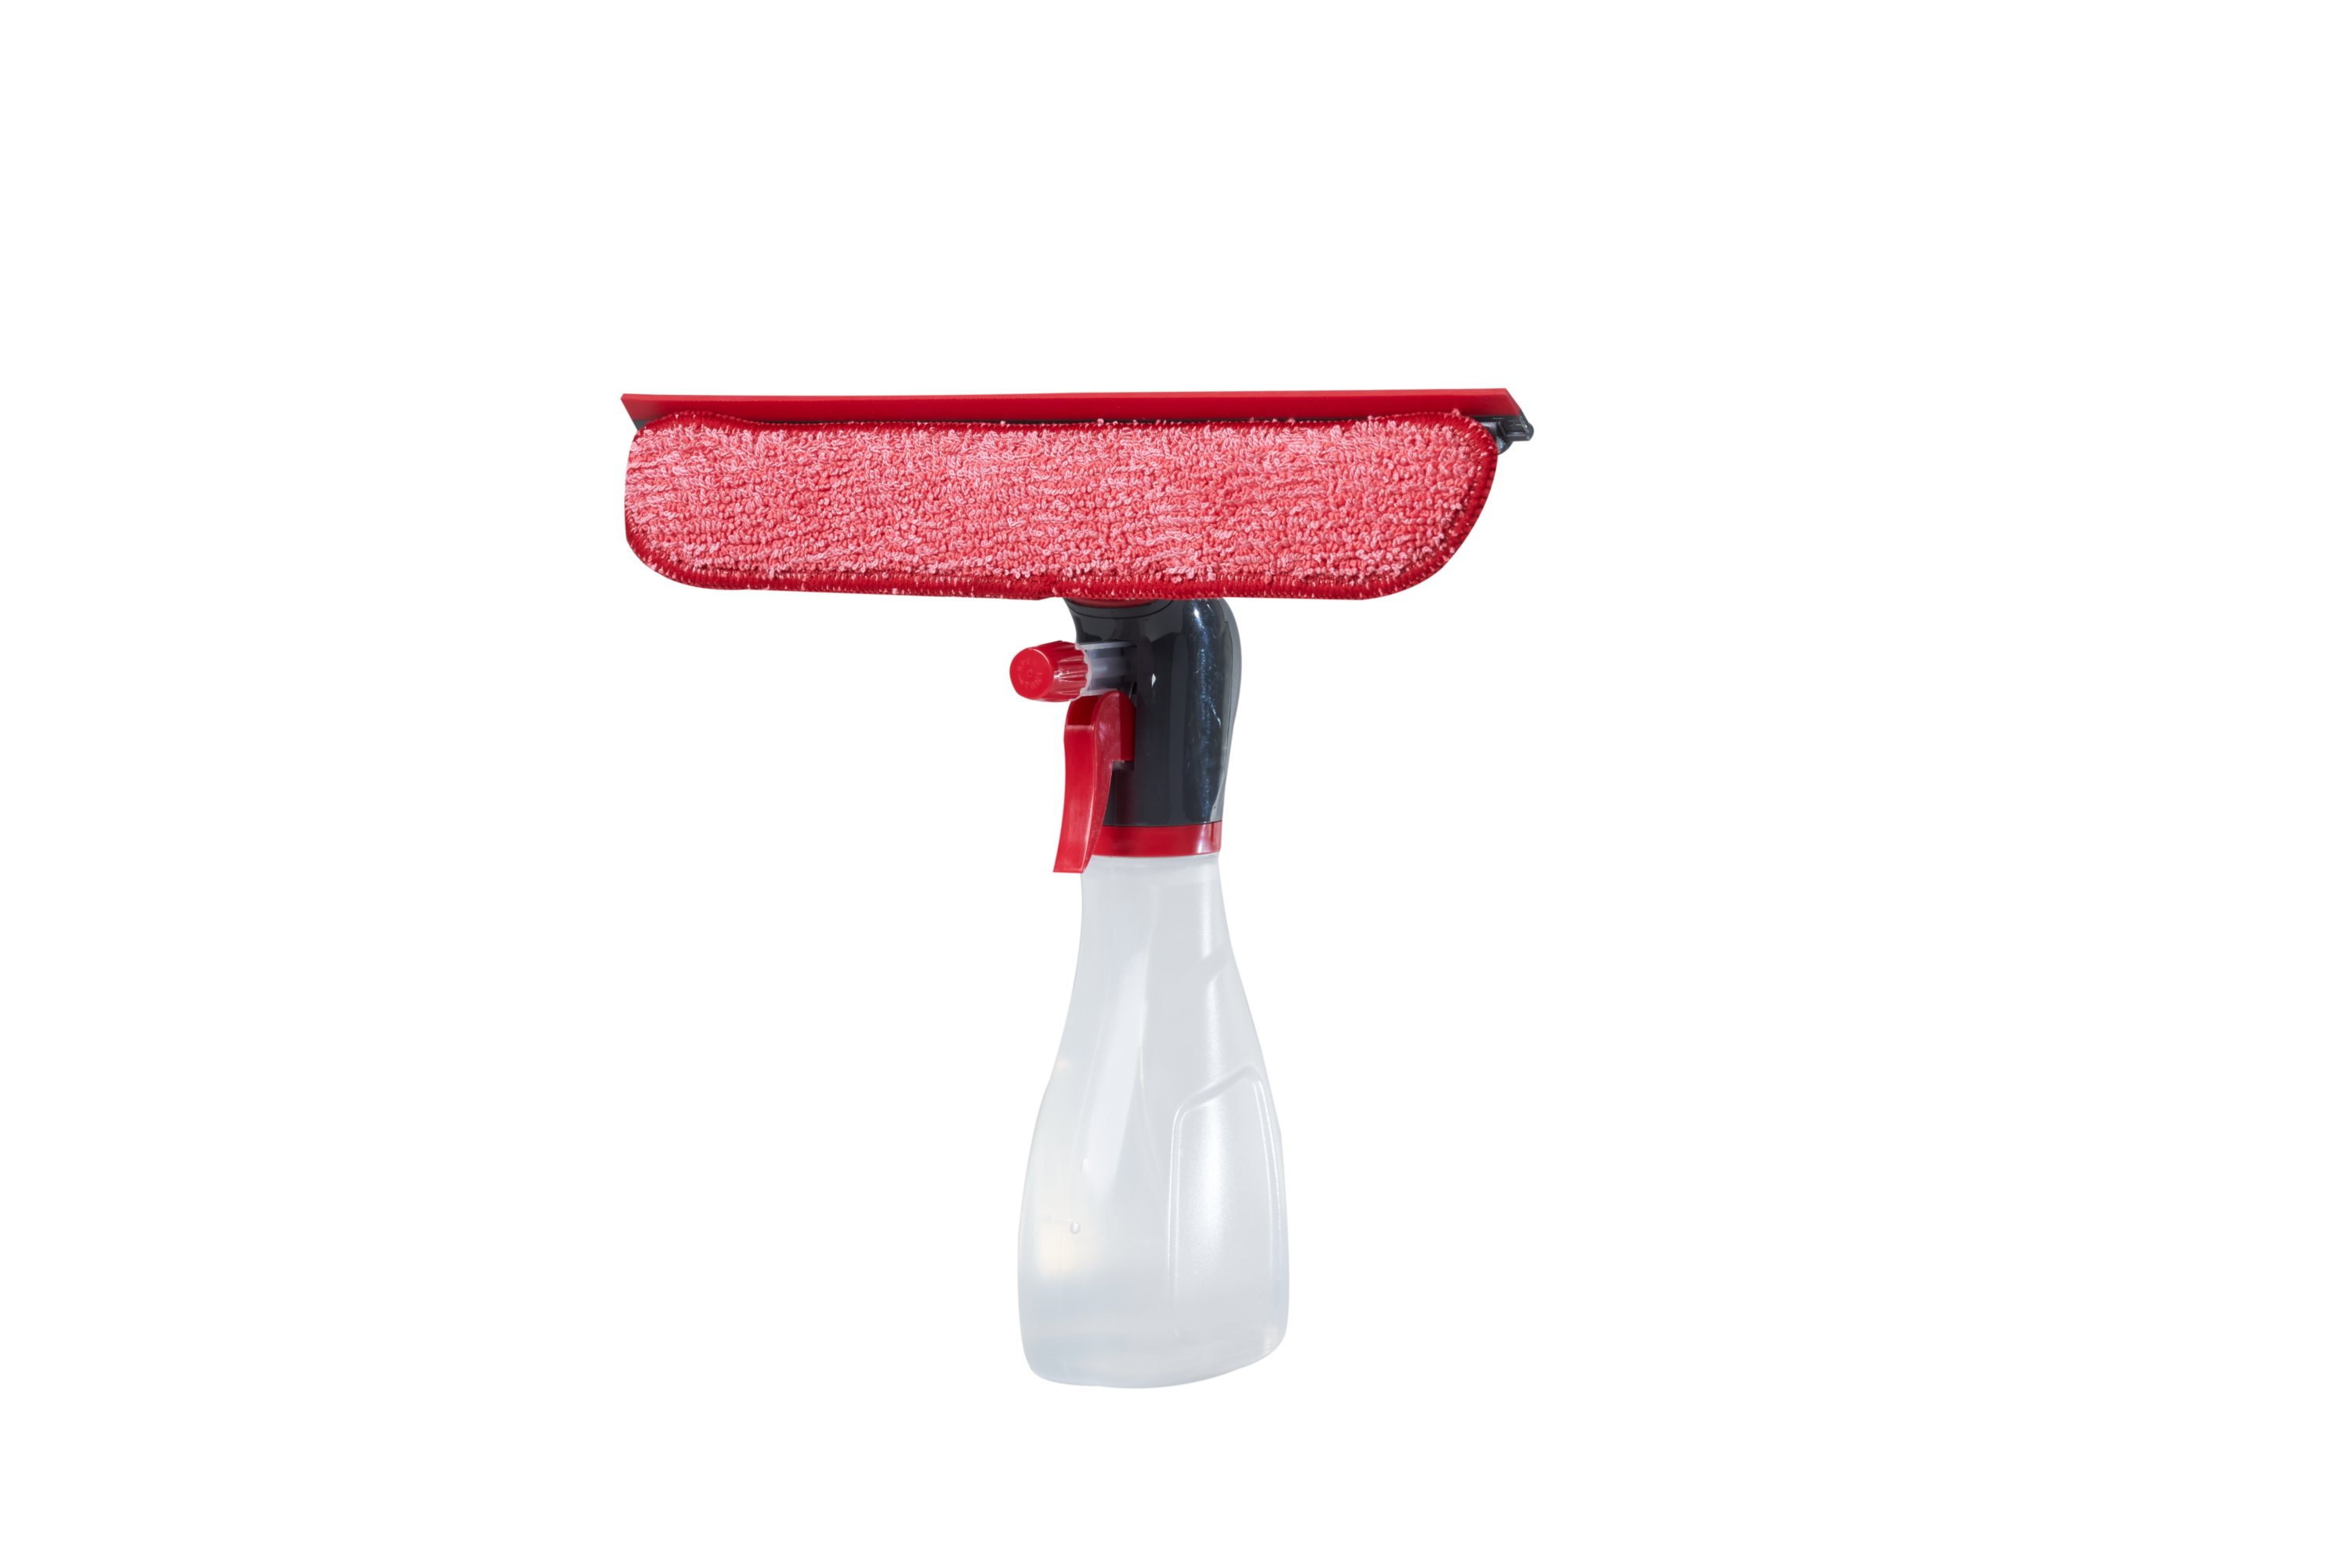 Car Window Cleaner Squeegee With Refillable Spray Bottle For Home